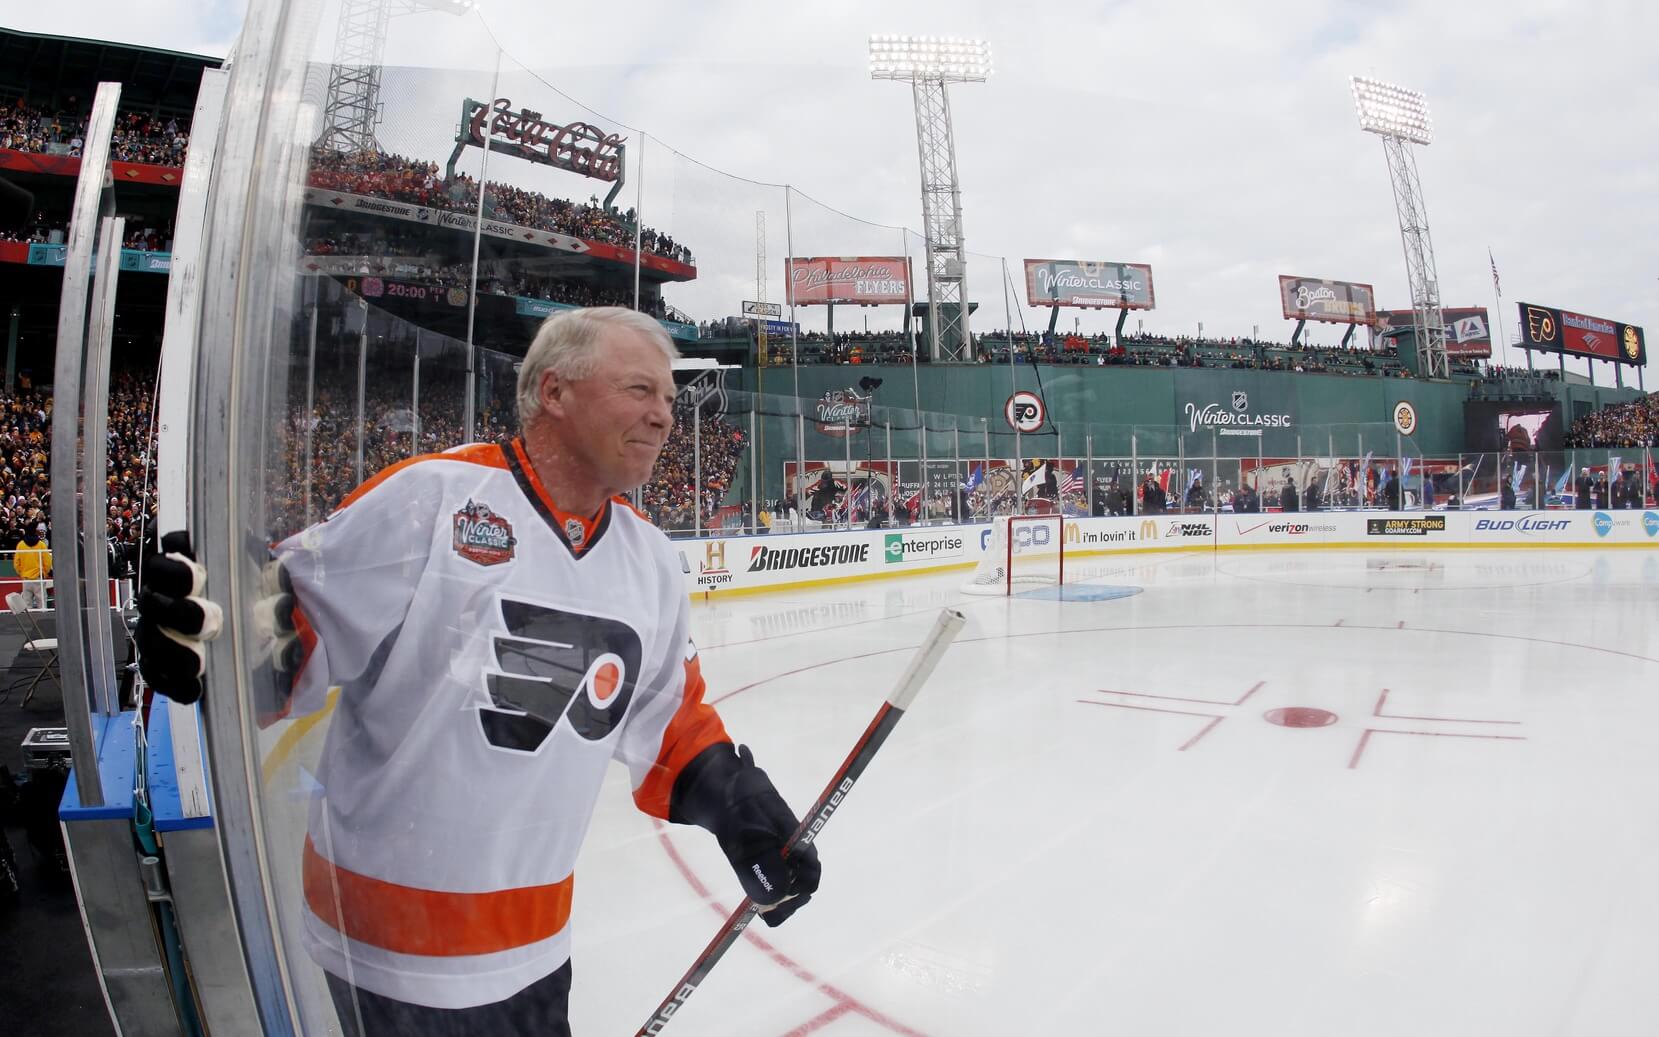 Remembering the 2012 Winter Classic: New York Rangers defeat Flyers